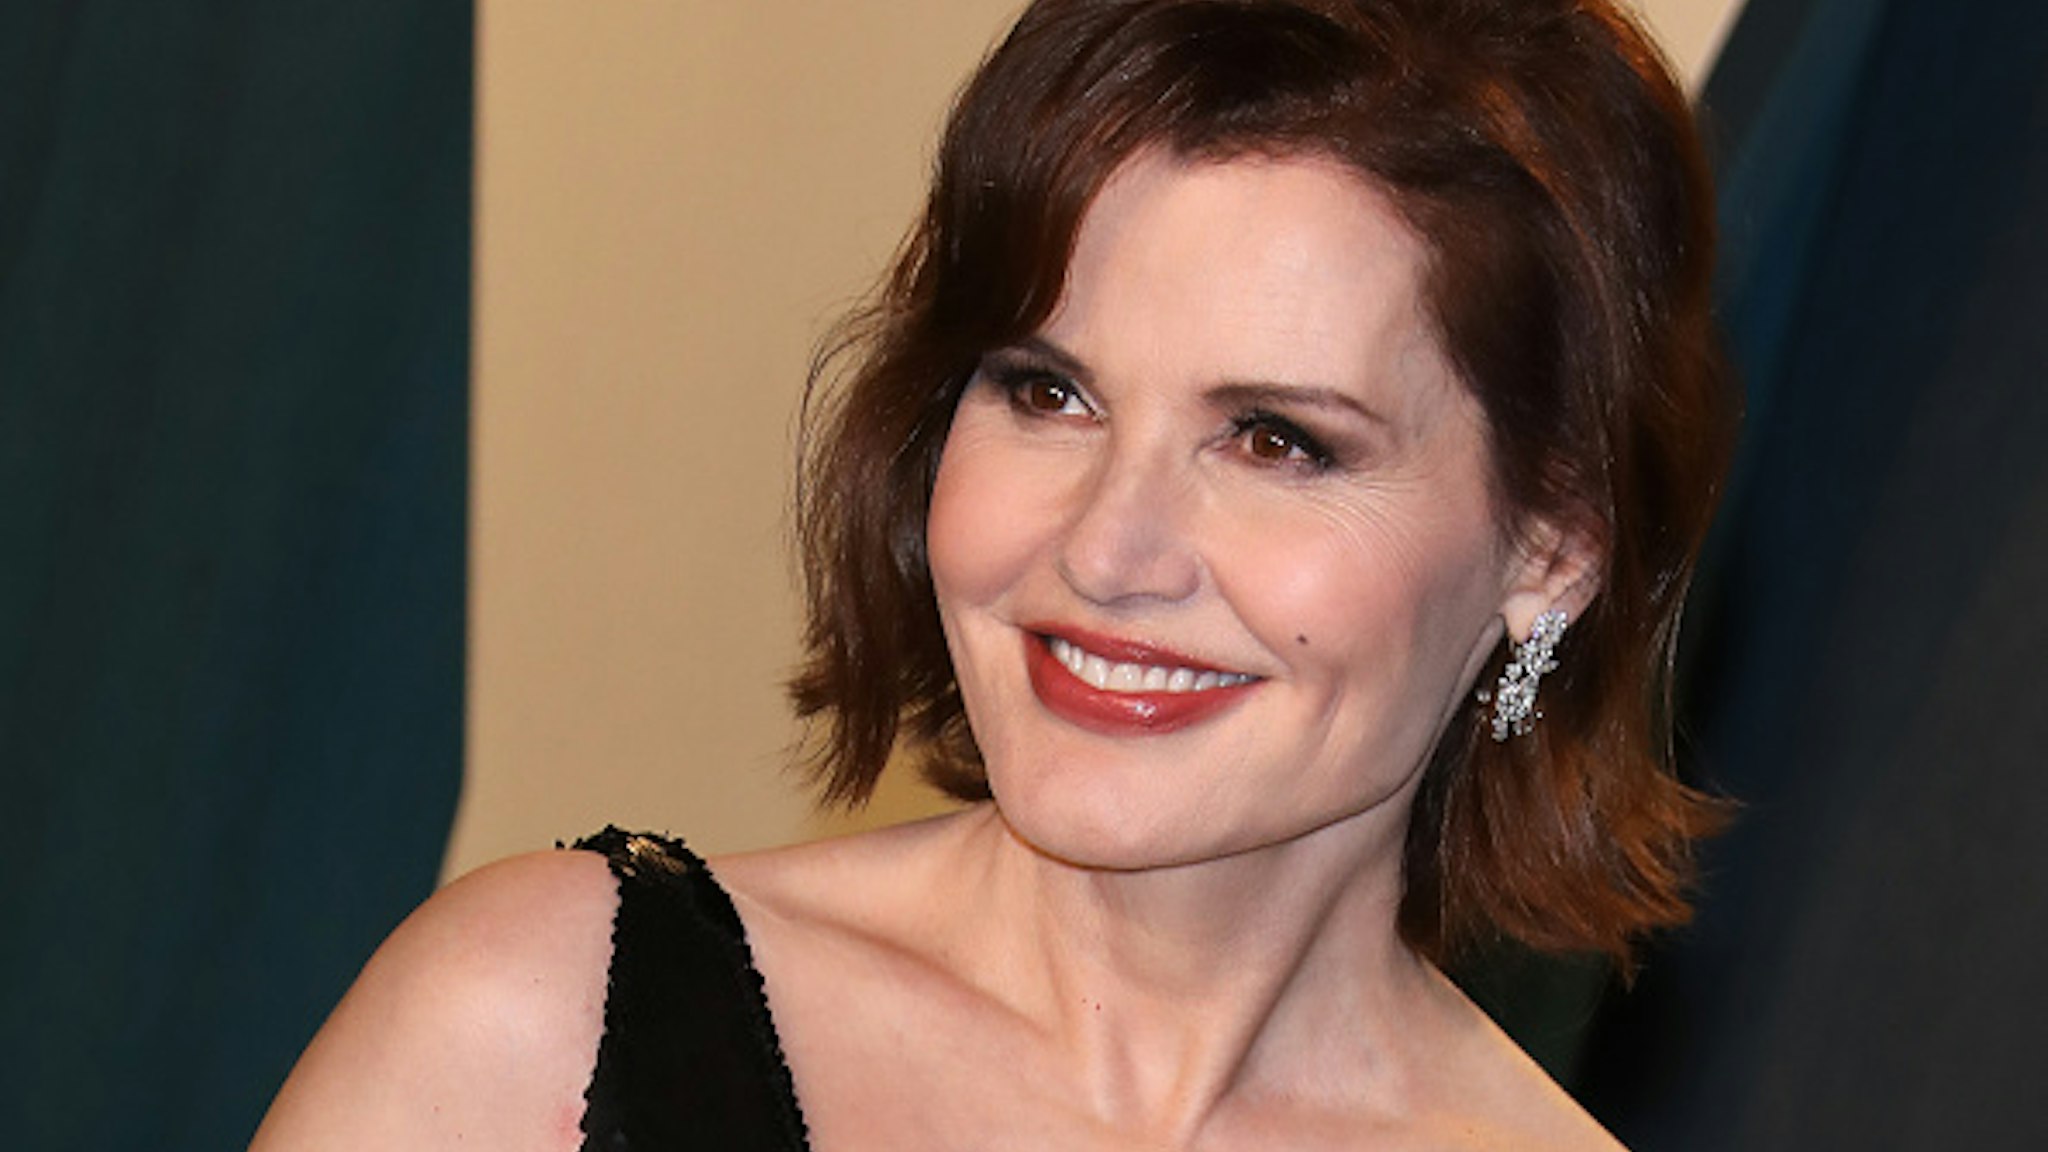 BEVERLY HILLS, CALIFORNIA - FEBRUARY 09: Geena Davis attends the 2020 Vanity Fair Oscar Party at Wallis Annenberg Center for the Performing Arts on February 09, 2020 in Beverly Hills, California.